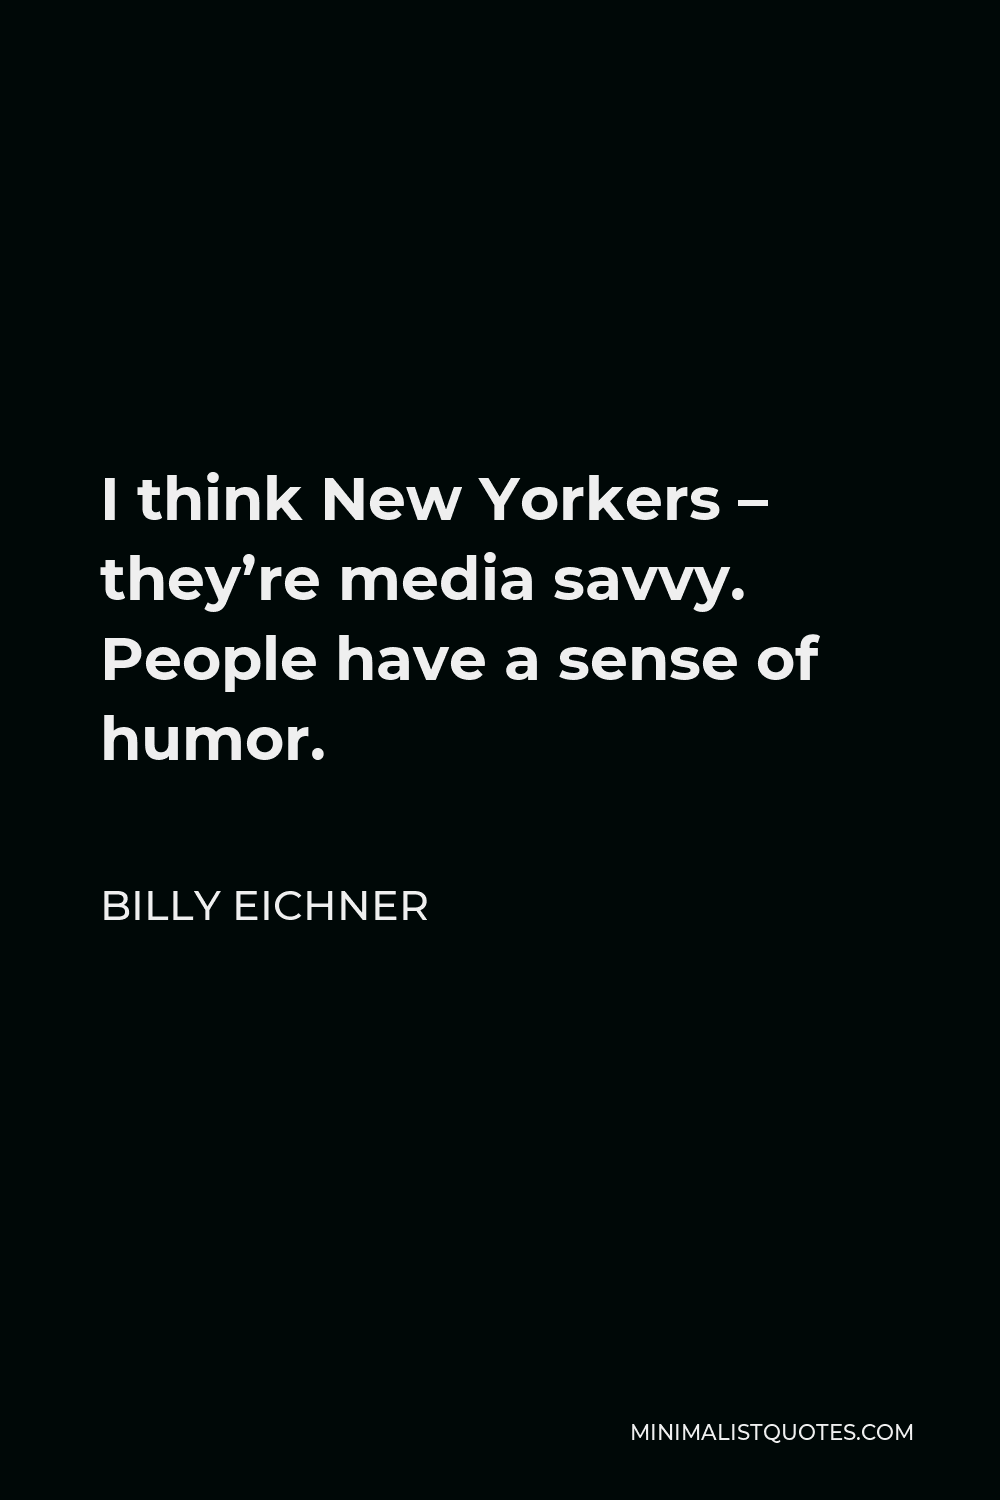 Billy Eichner Quote - I think New Yorkers – they’re media savvy. People have a sense of humor.